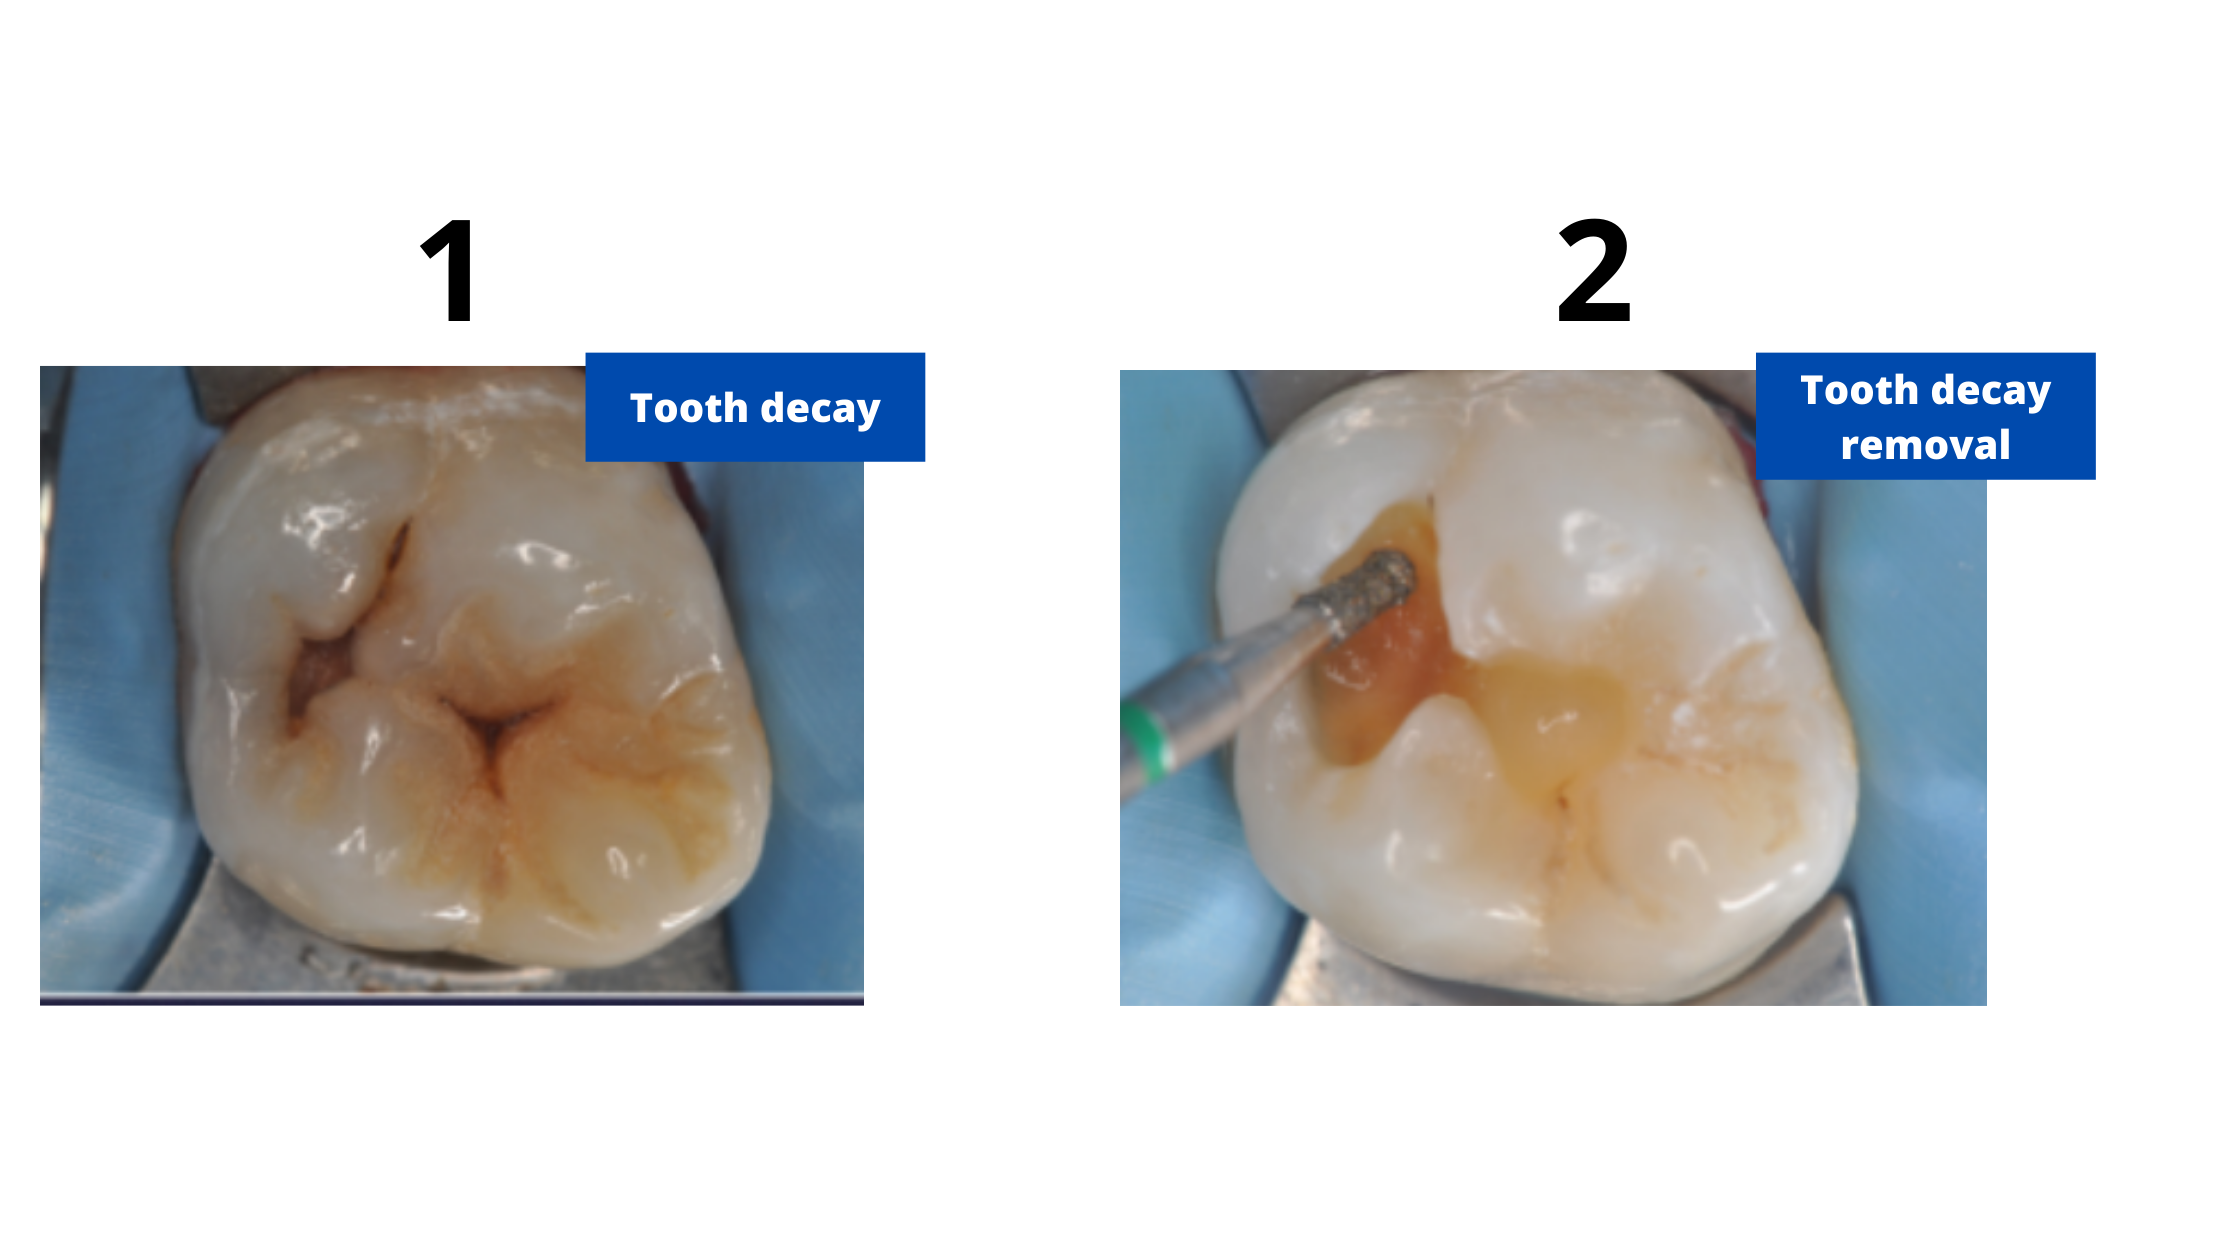 tooth decay removal on a molar tooth